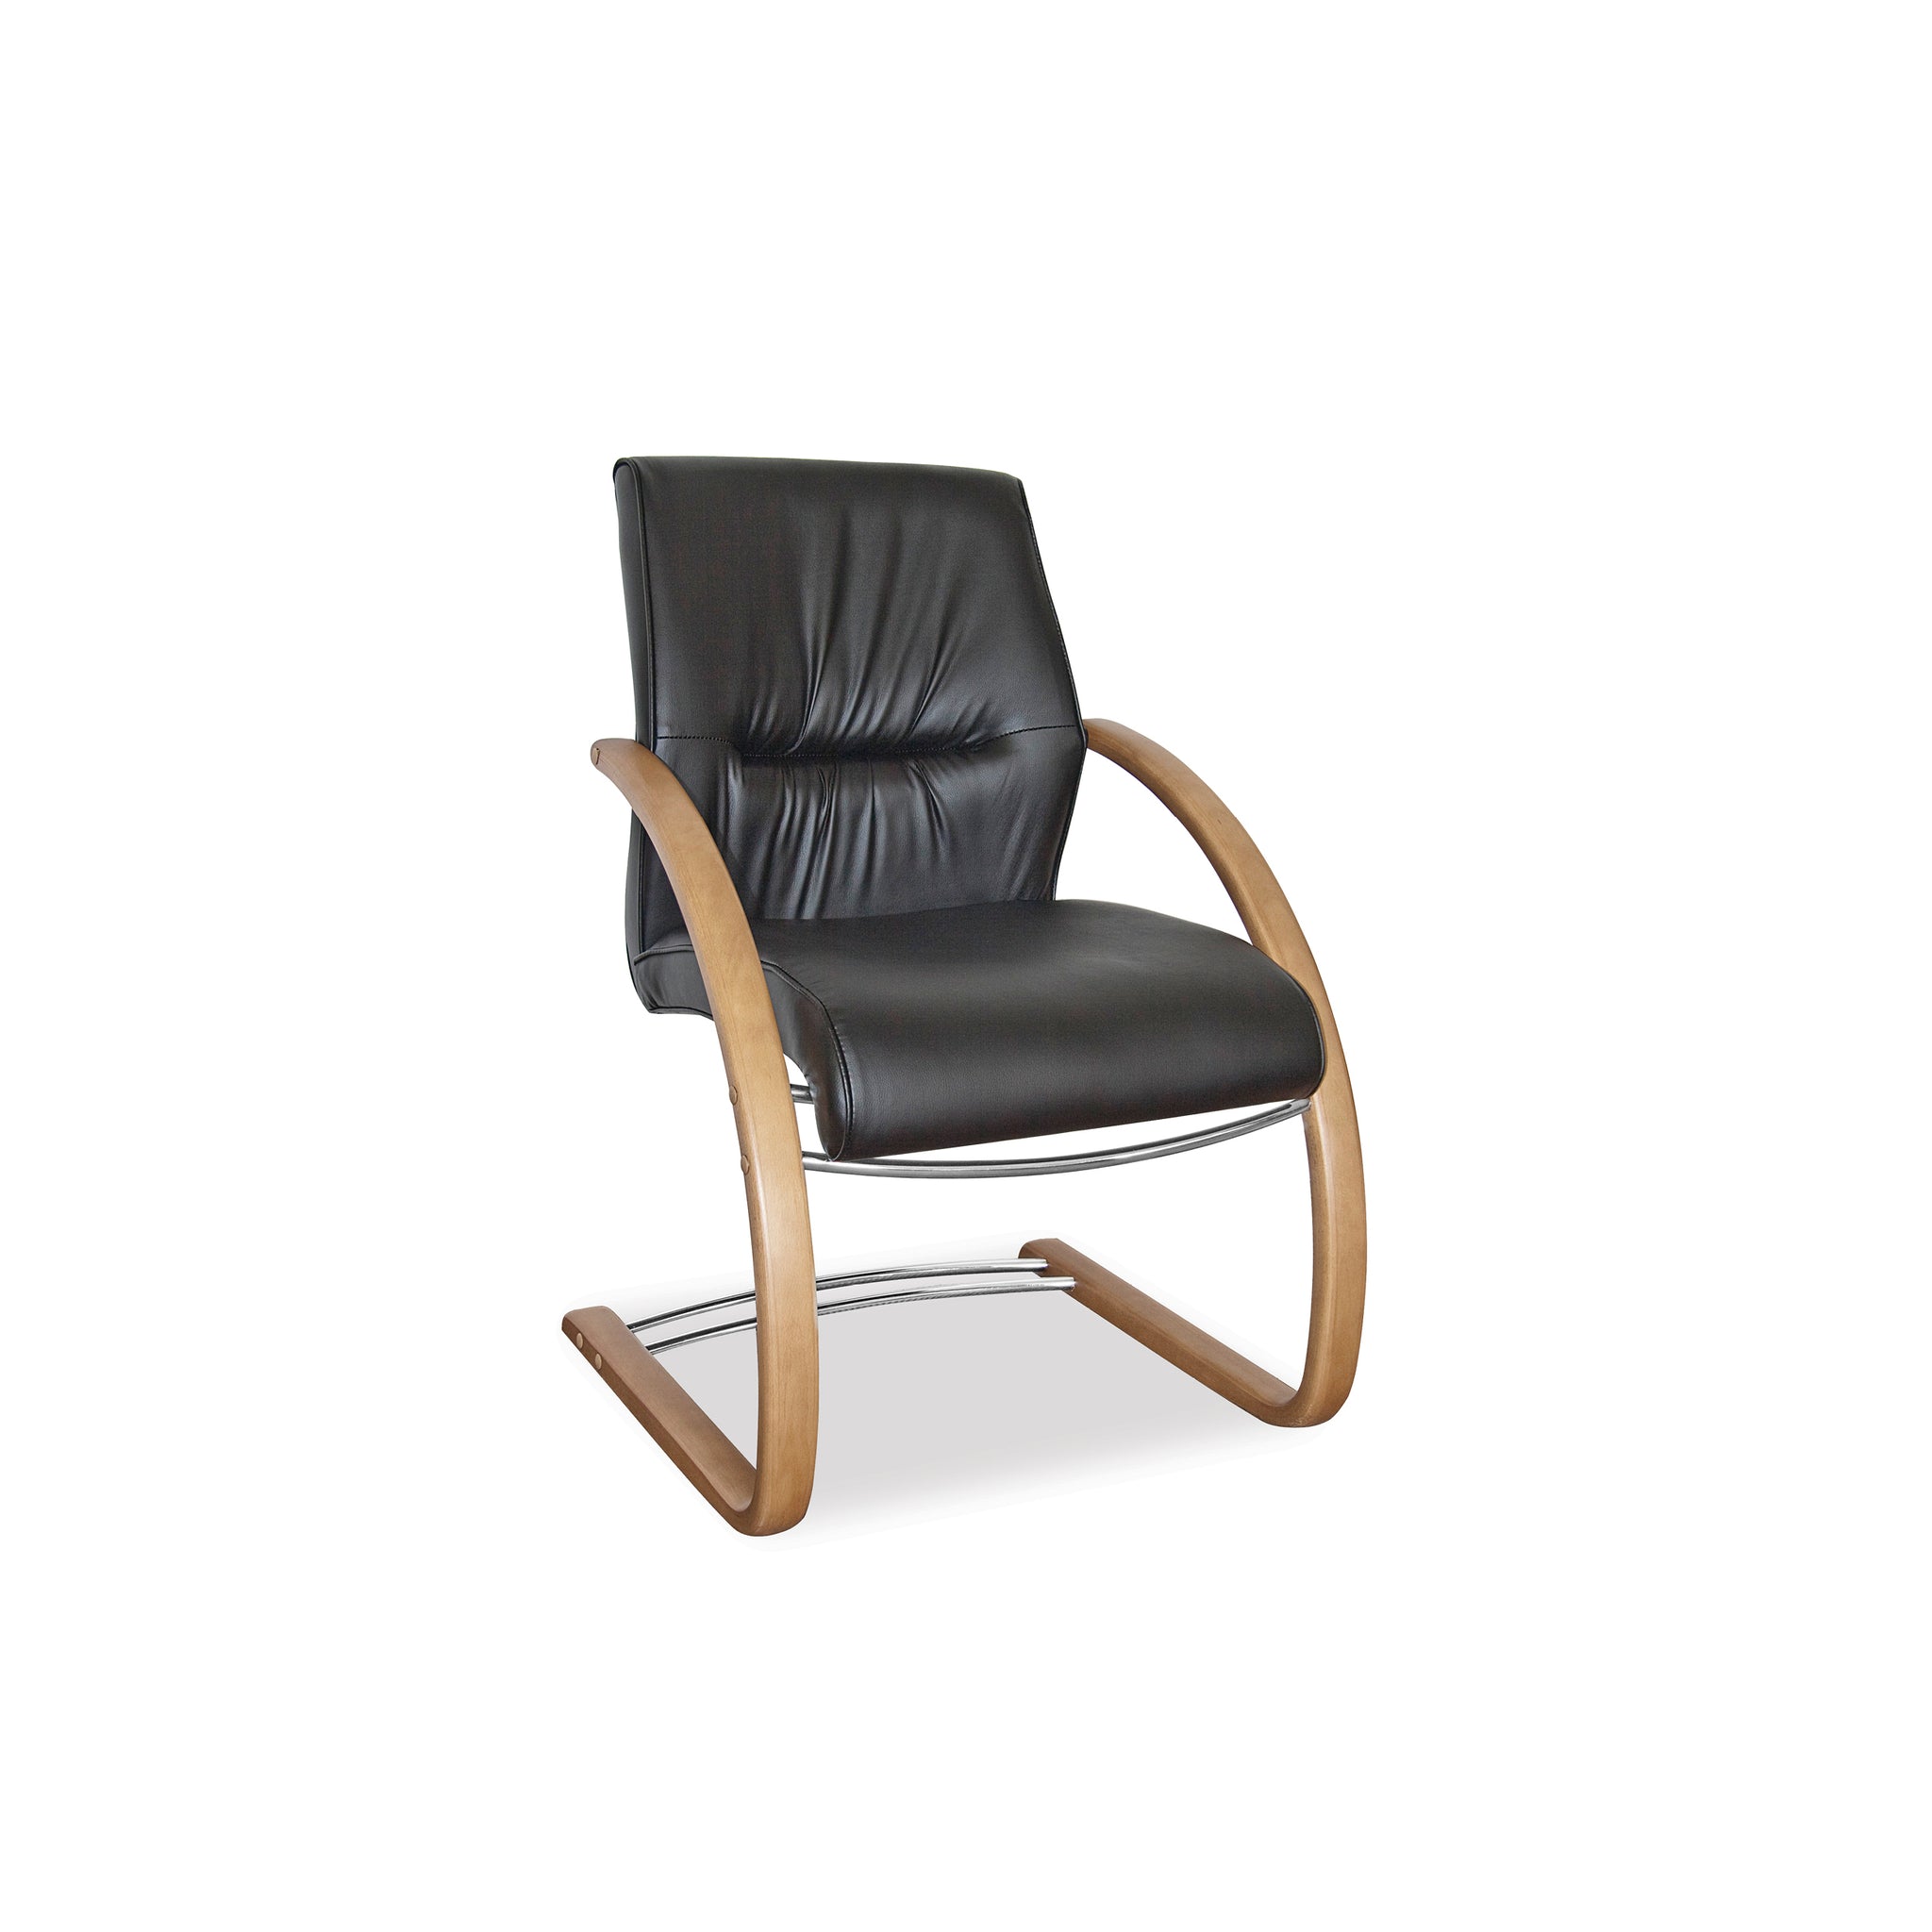 Hedcor Salvador Visitors sleigh office chair